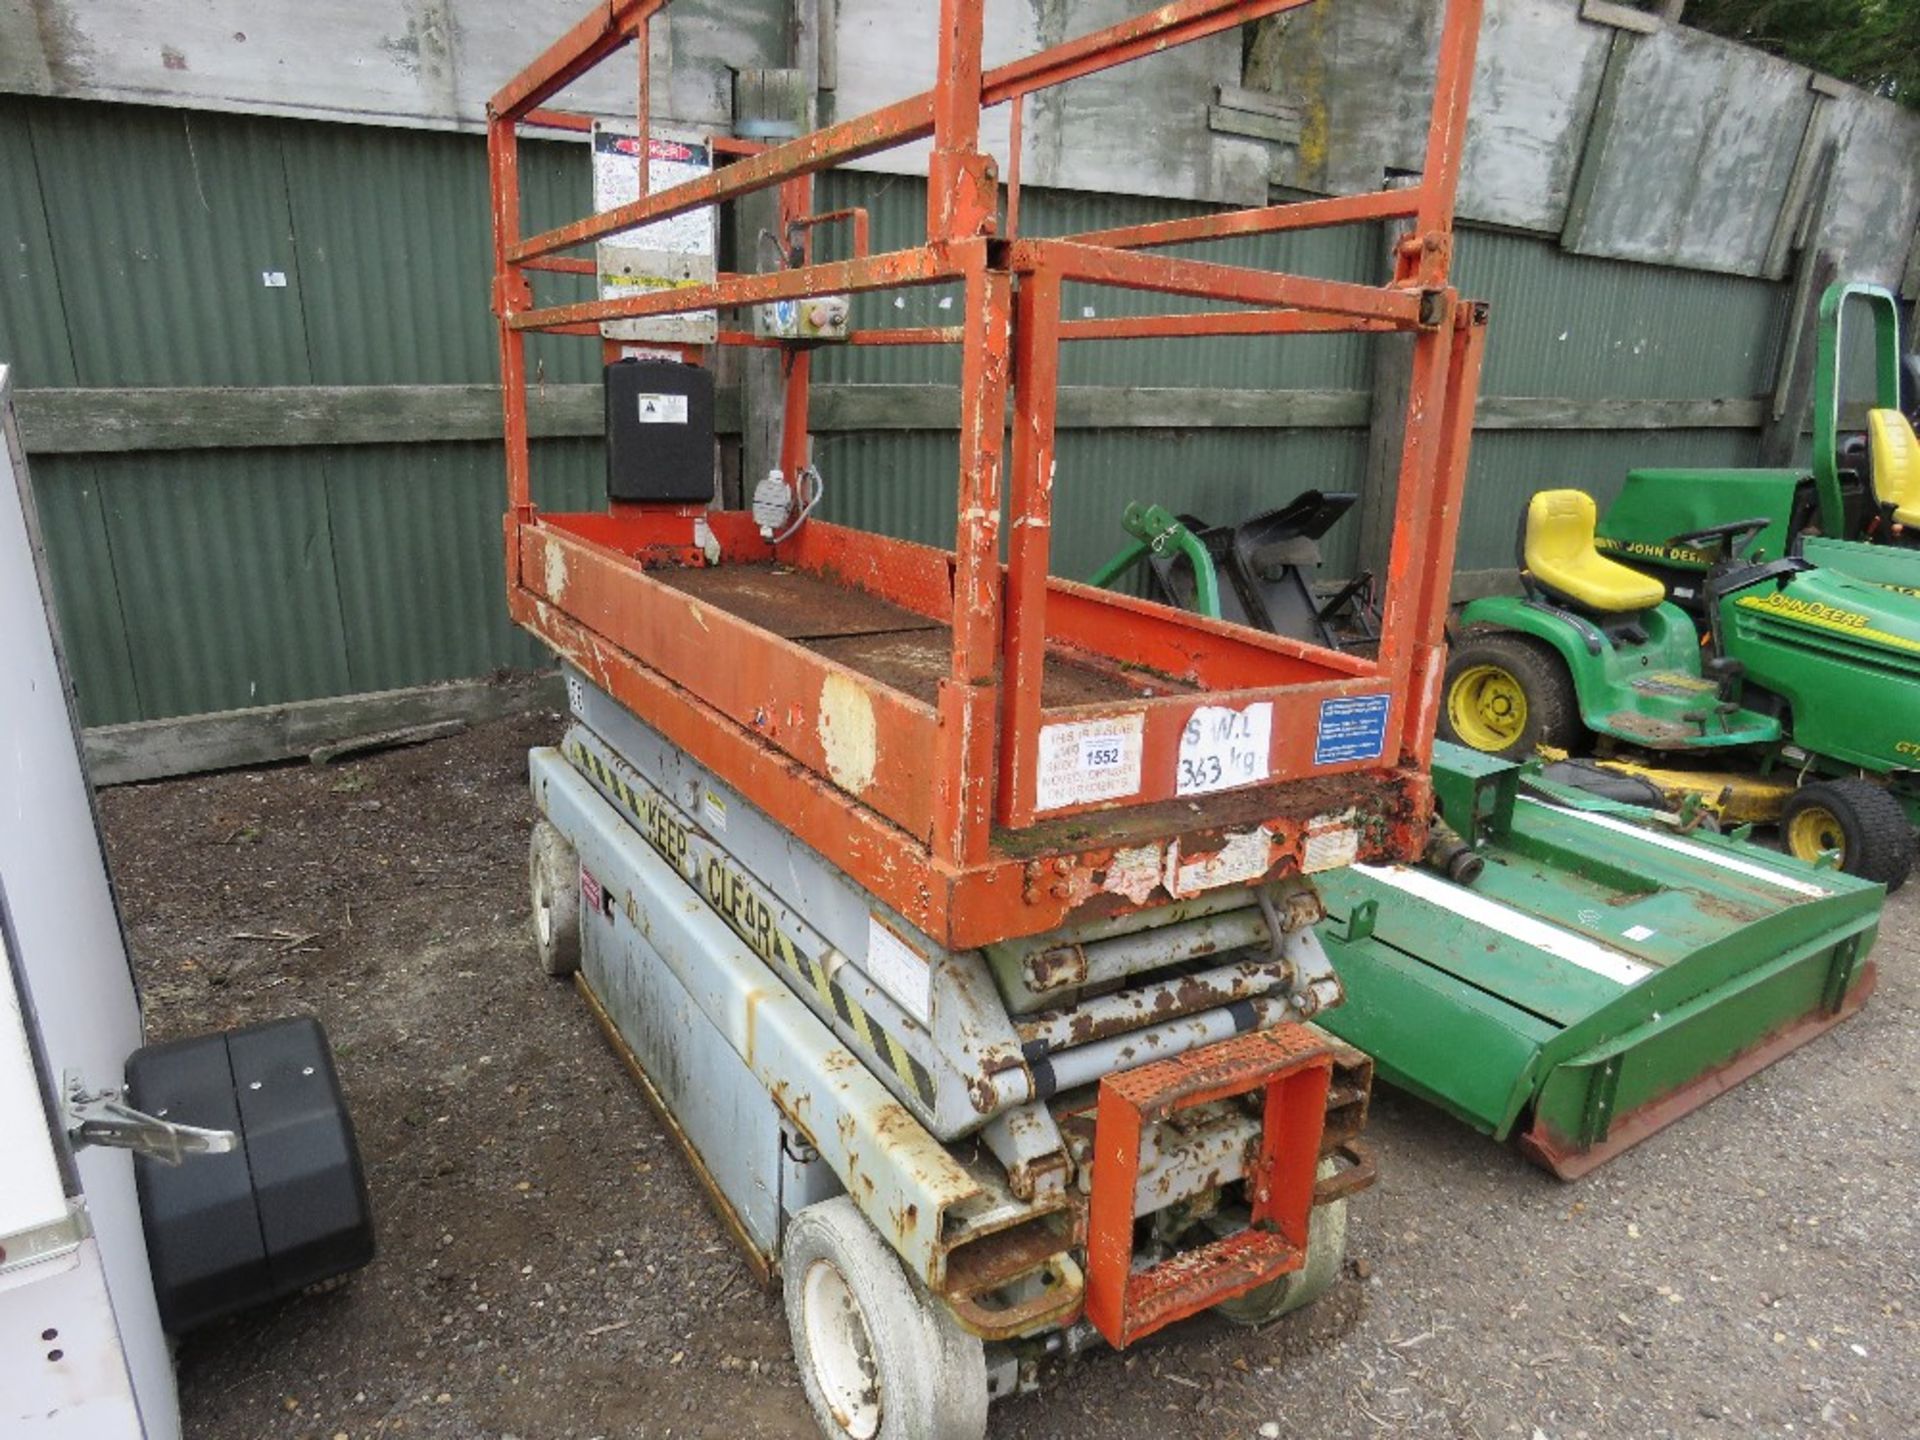 SKYJACK 3220 SCISSOR LIFT ACCESS PLATFORM, YEAR 1998. BATTERY LOW WHEN DELIVERED SO UNTESTED.